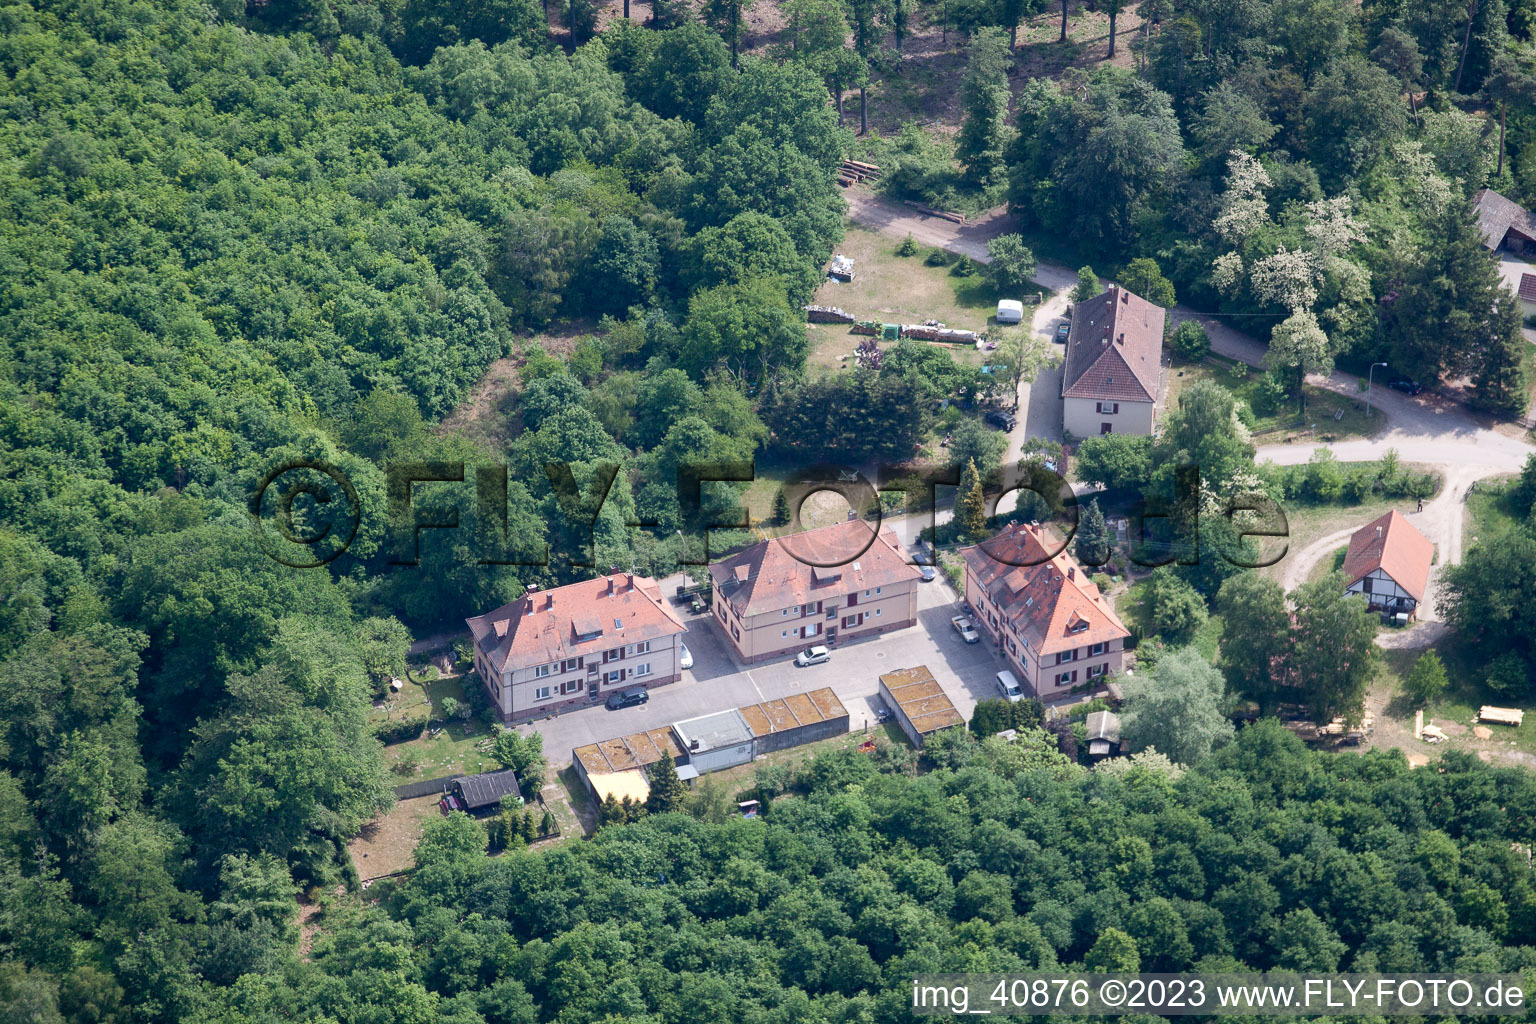 Aerial photograpy of (Palatinate), Seufzerallee 4 in Scheibenhardt in the state Rhineland-Palatinate, Germany